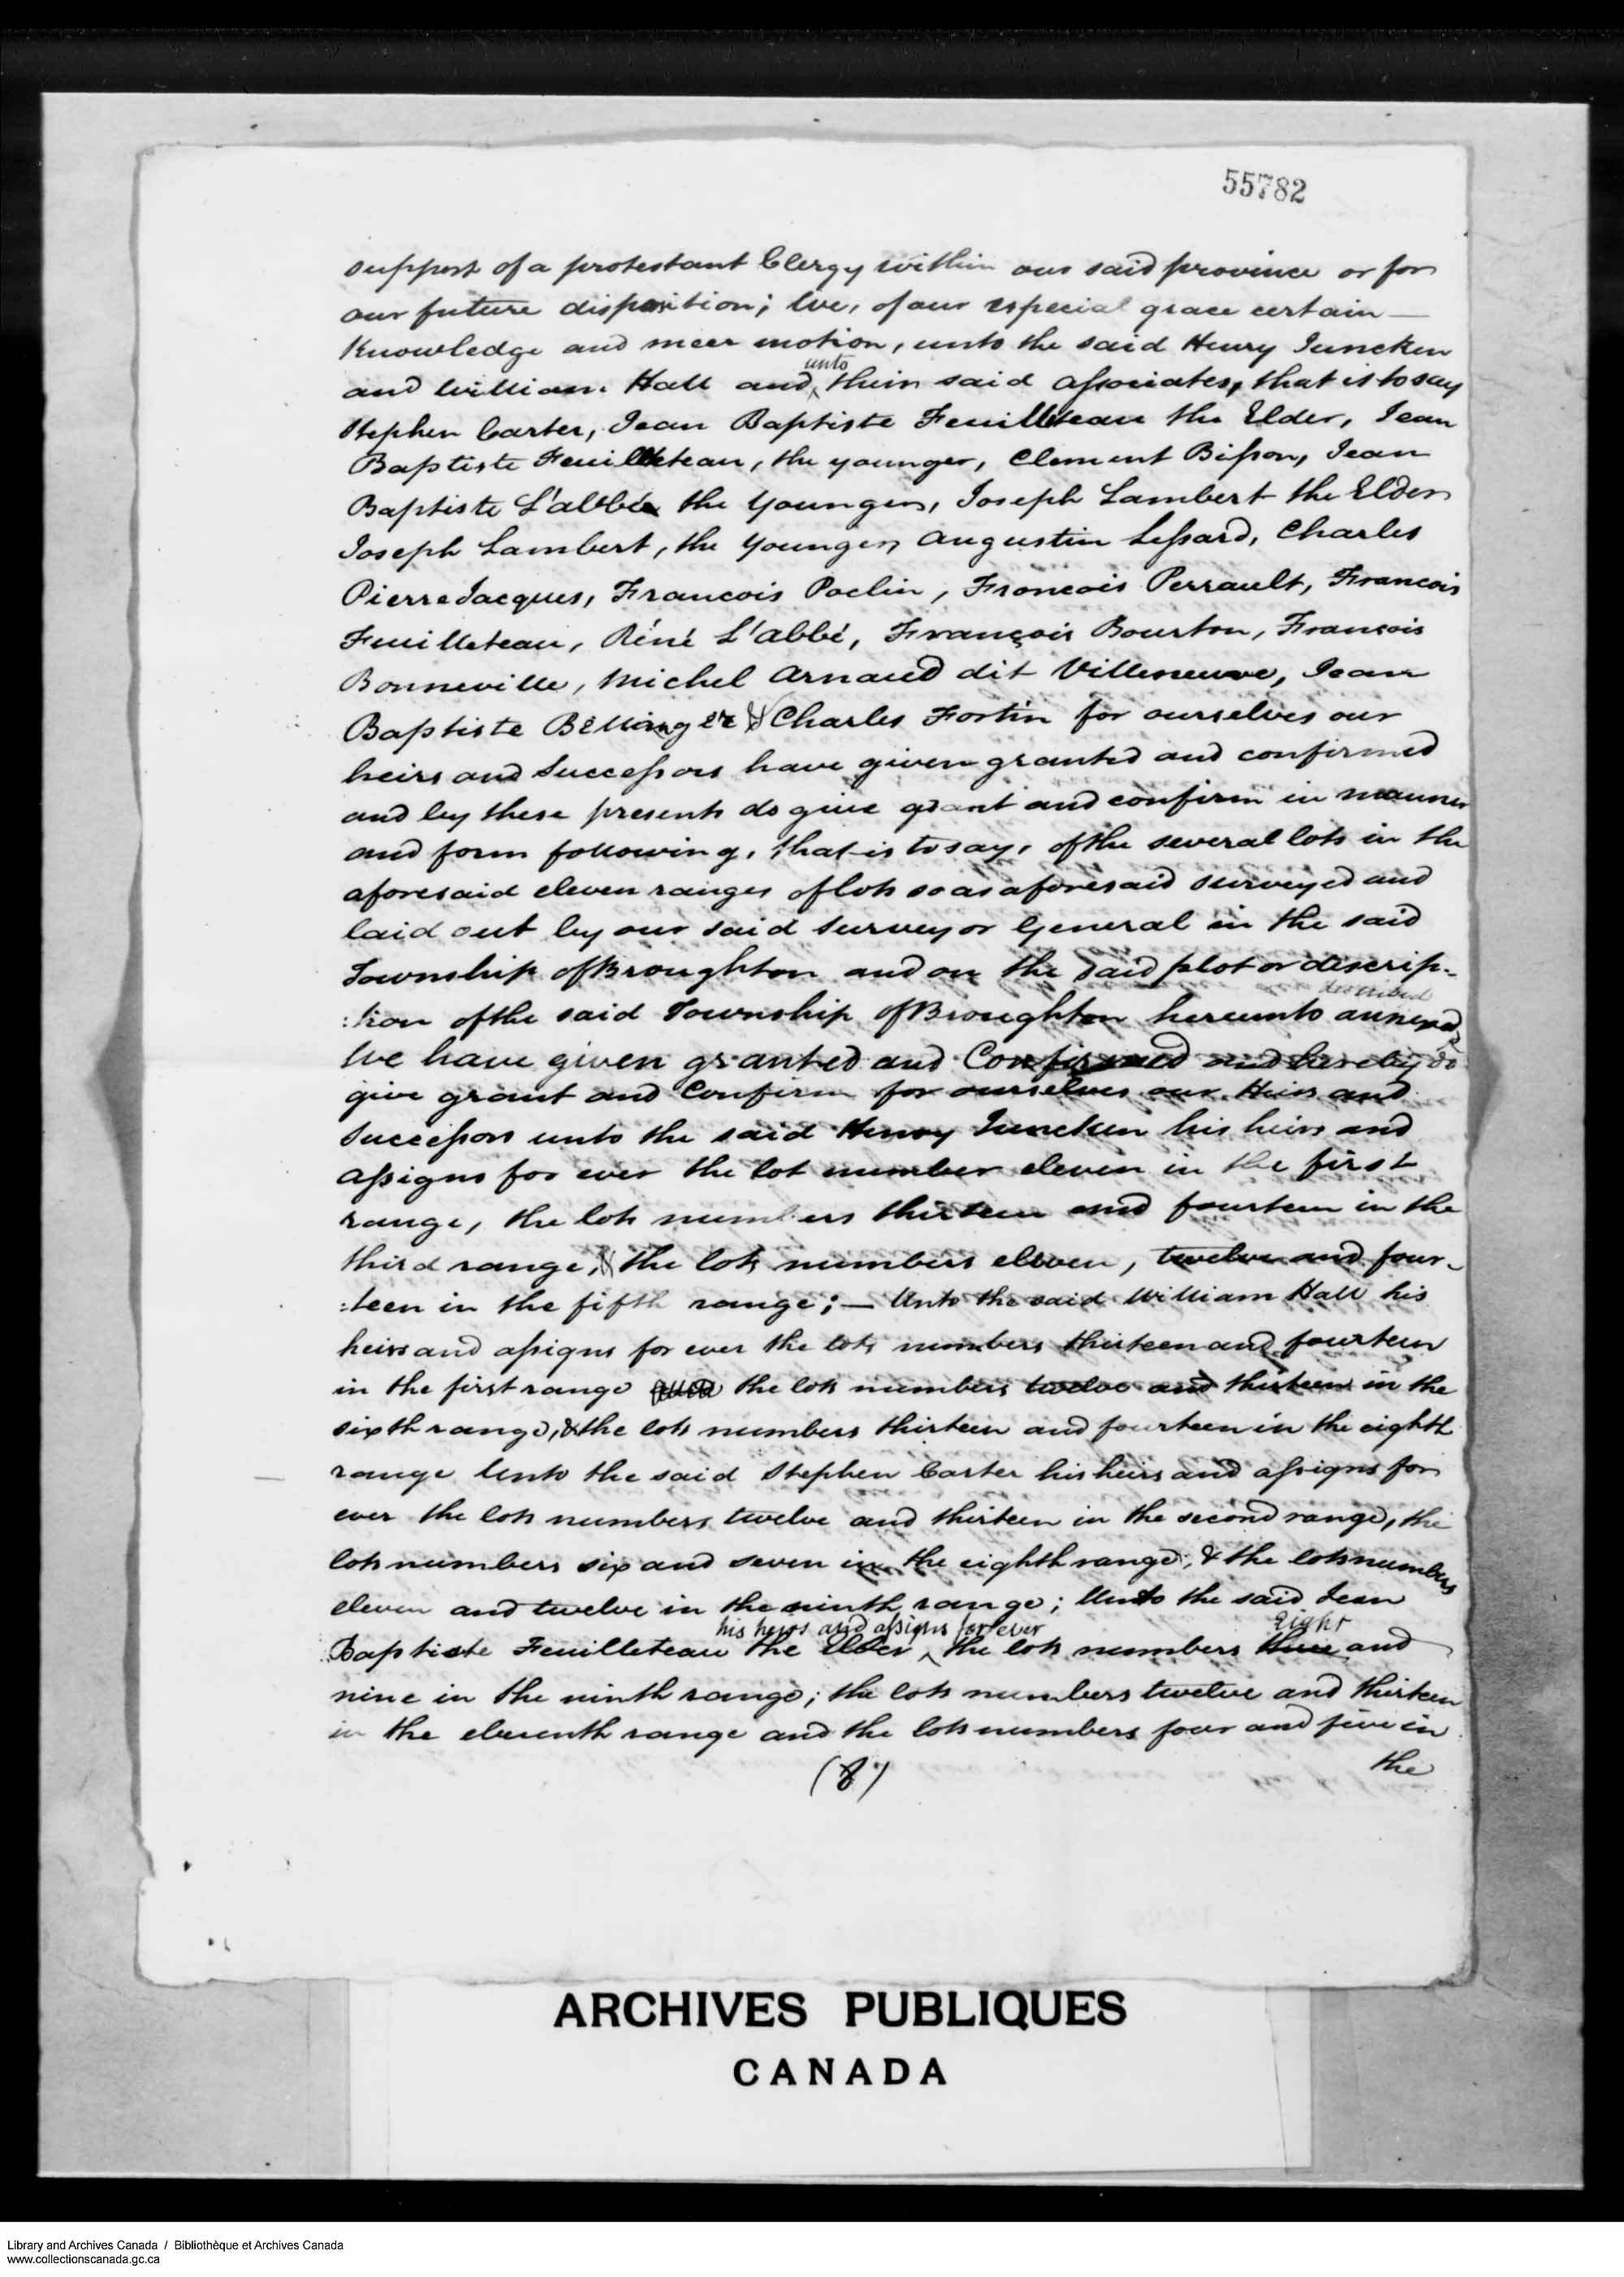 Digitized page of  for Image No.: e008700270